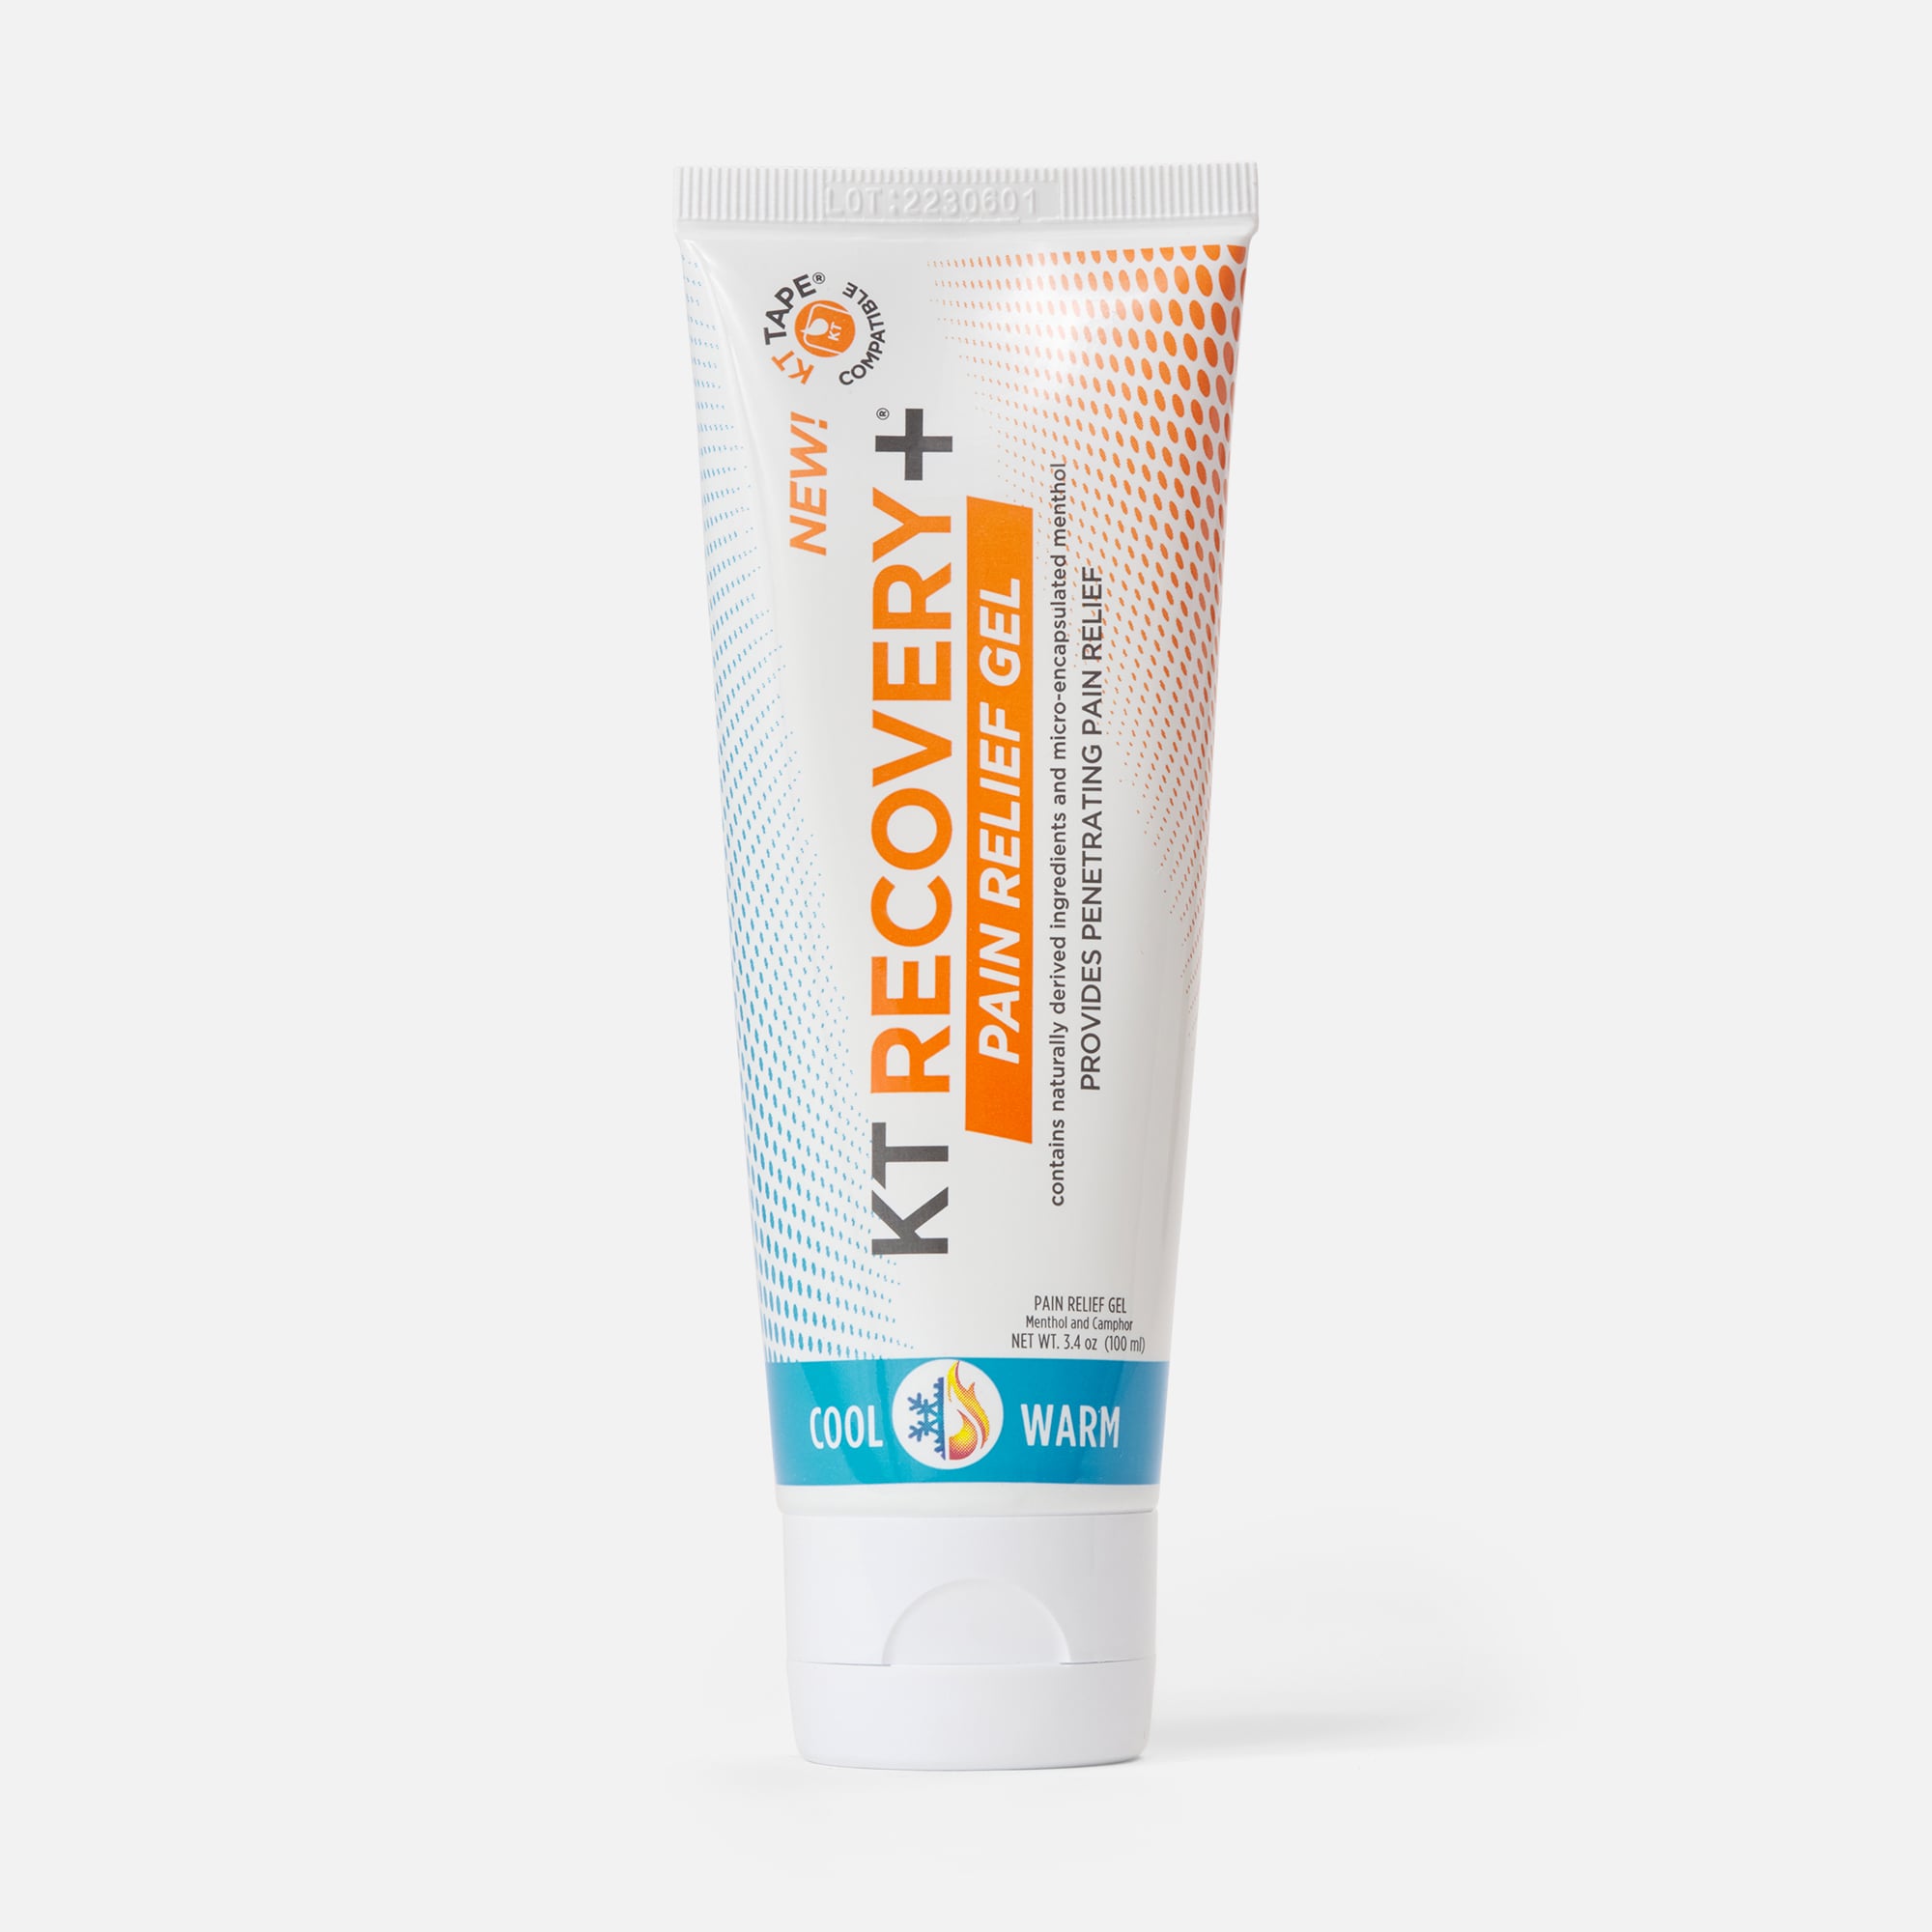 Kt Recovery+ Pain Relief Gel - 3.4 oz